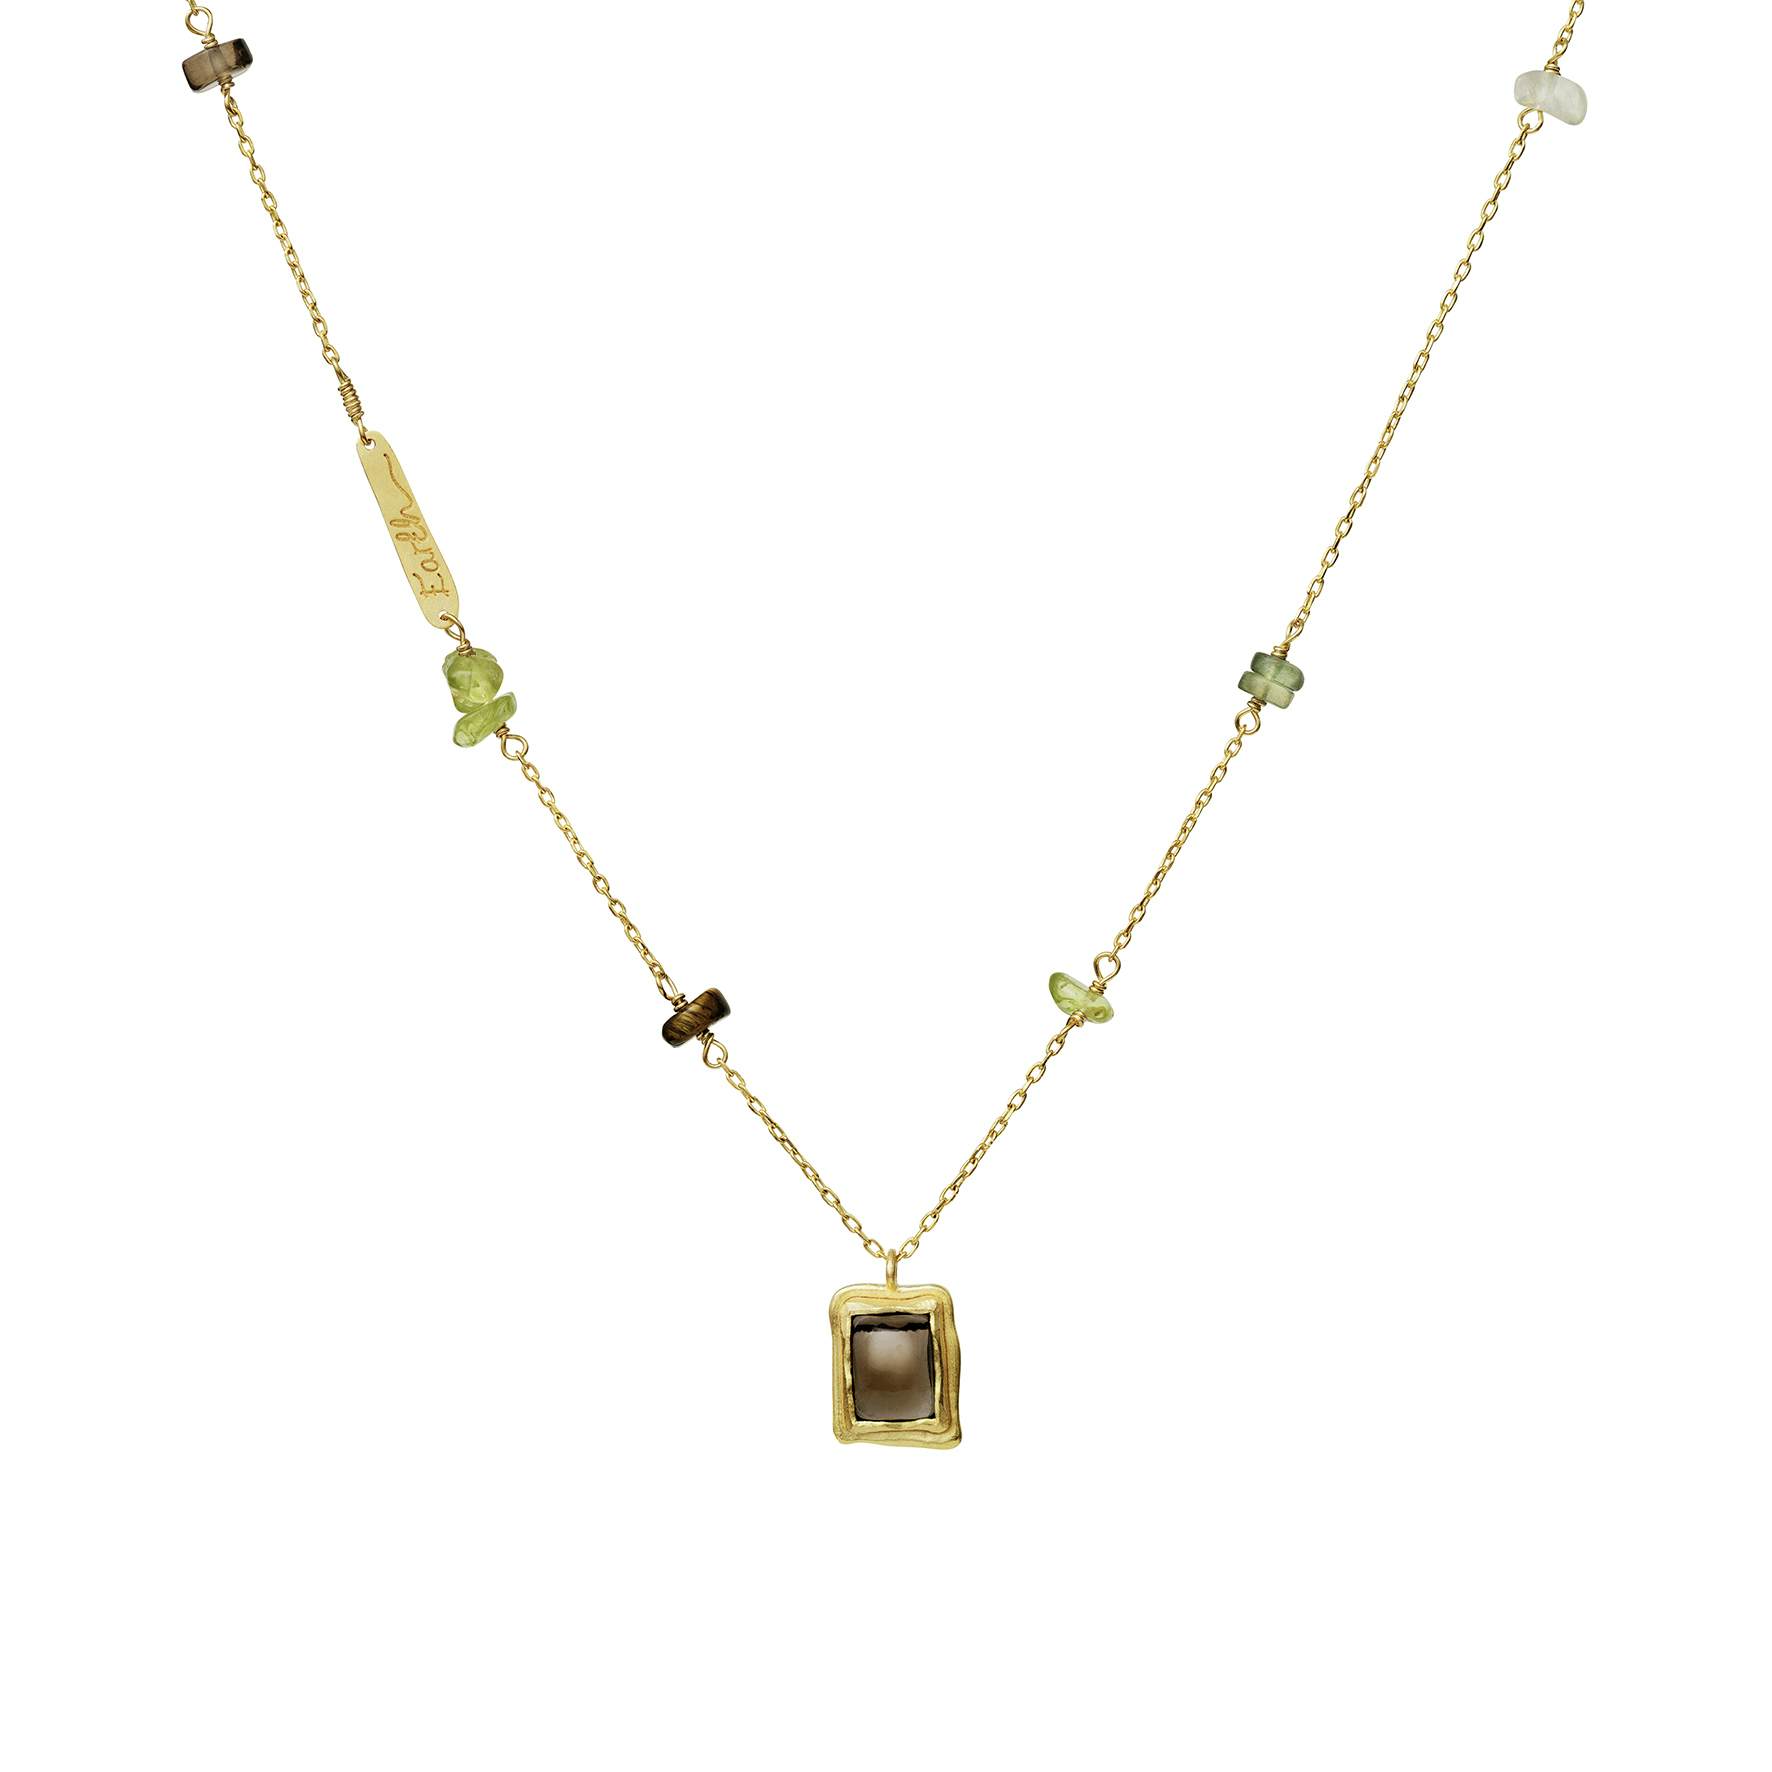 Eden Earth Necklace from Maanesten in Goldplated-Silver Sterling 925